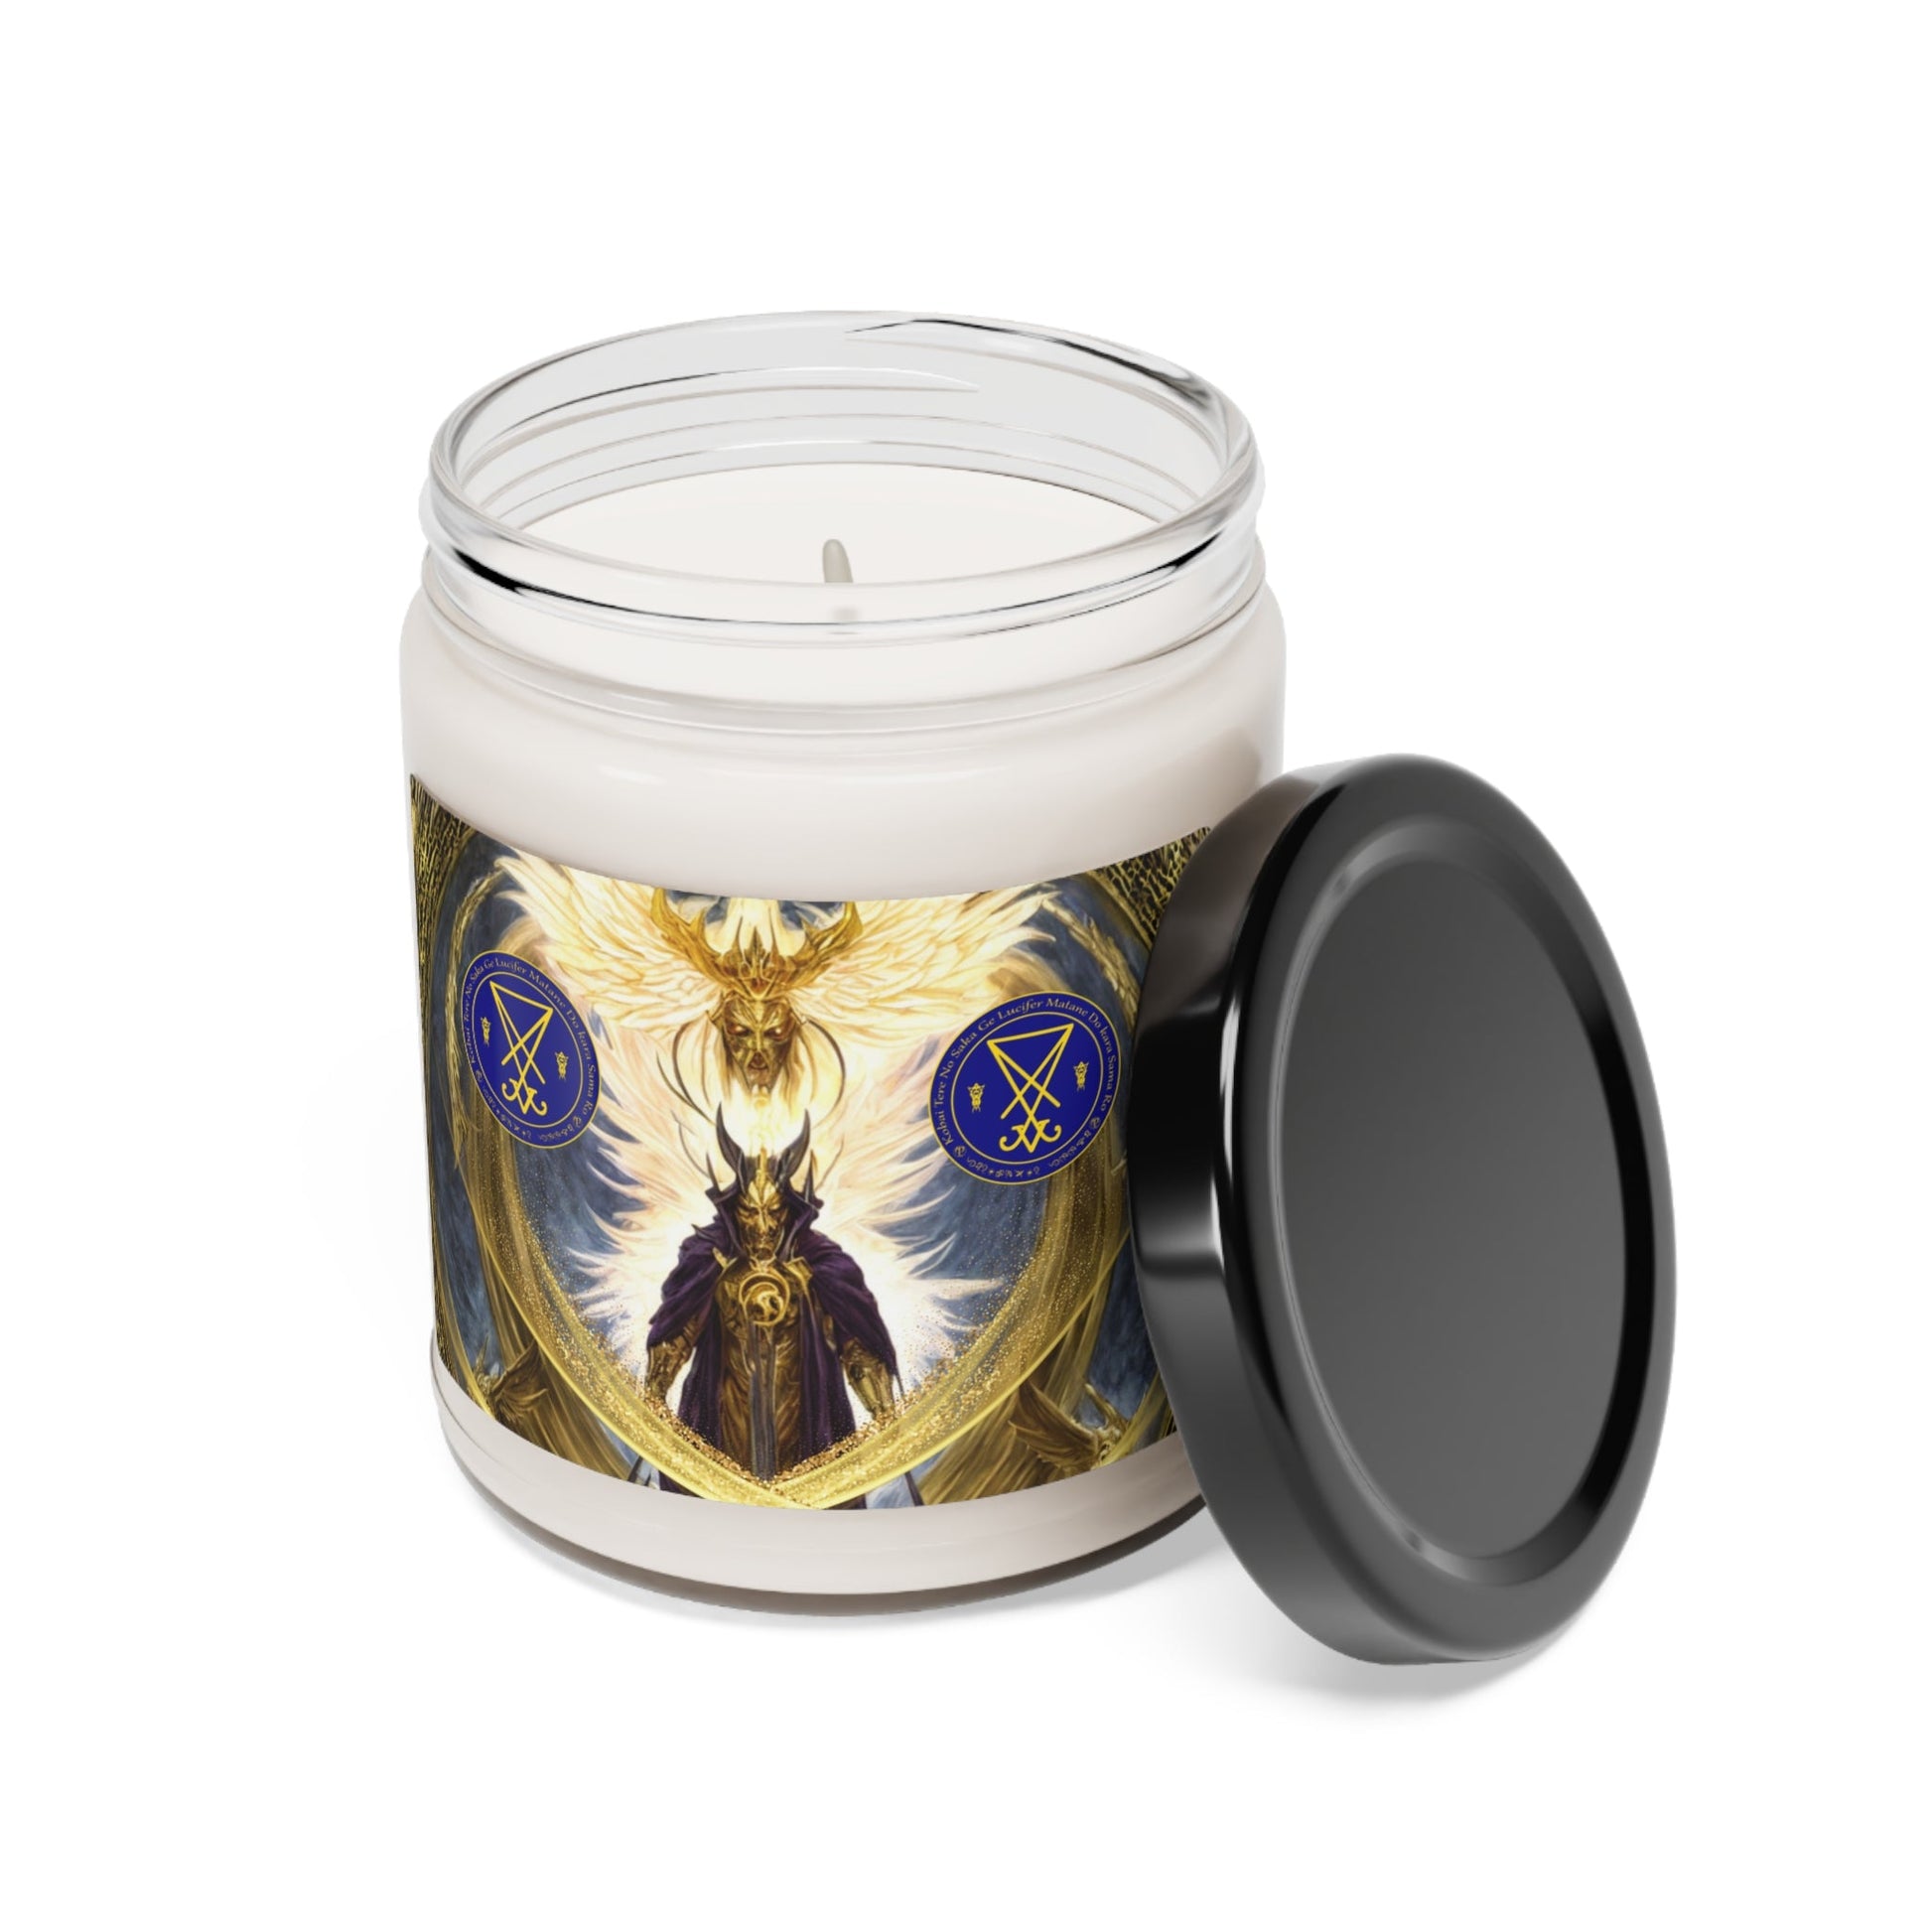 Demon-Lucifer-Scented-Soy-Candle-for-Altar-offerings-rituals-initiations-or-praying-and-meditation-12